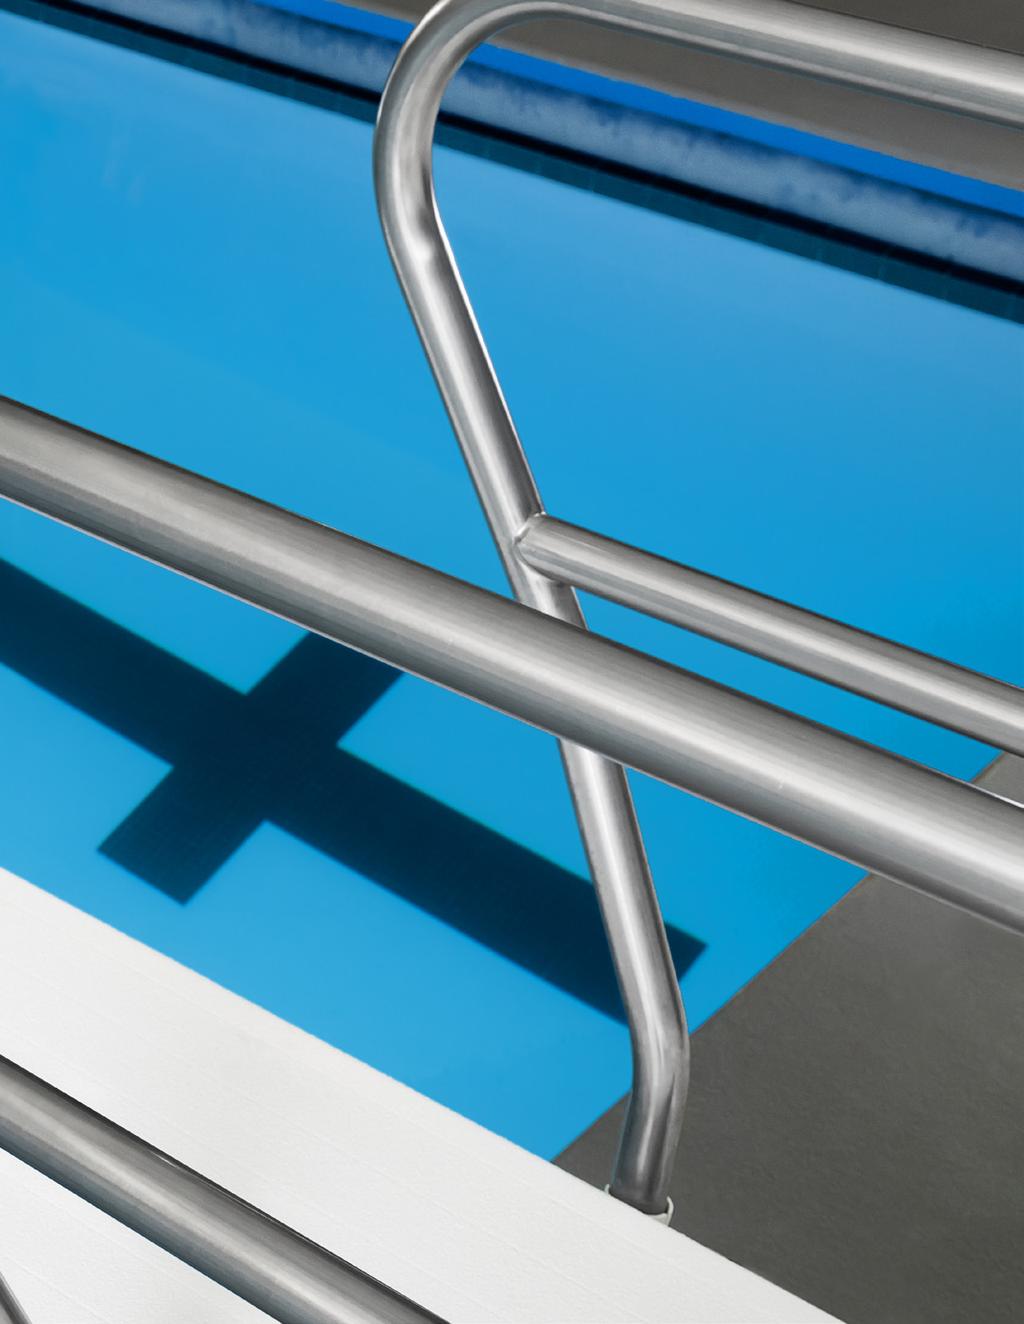 diving boards & stands Durability, longevity and safety are the hallmarks of S.R. Smith diving boards and stands.